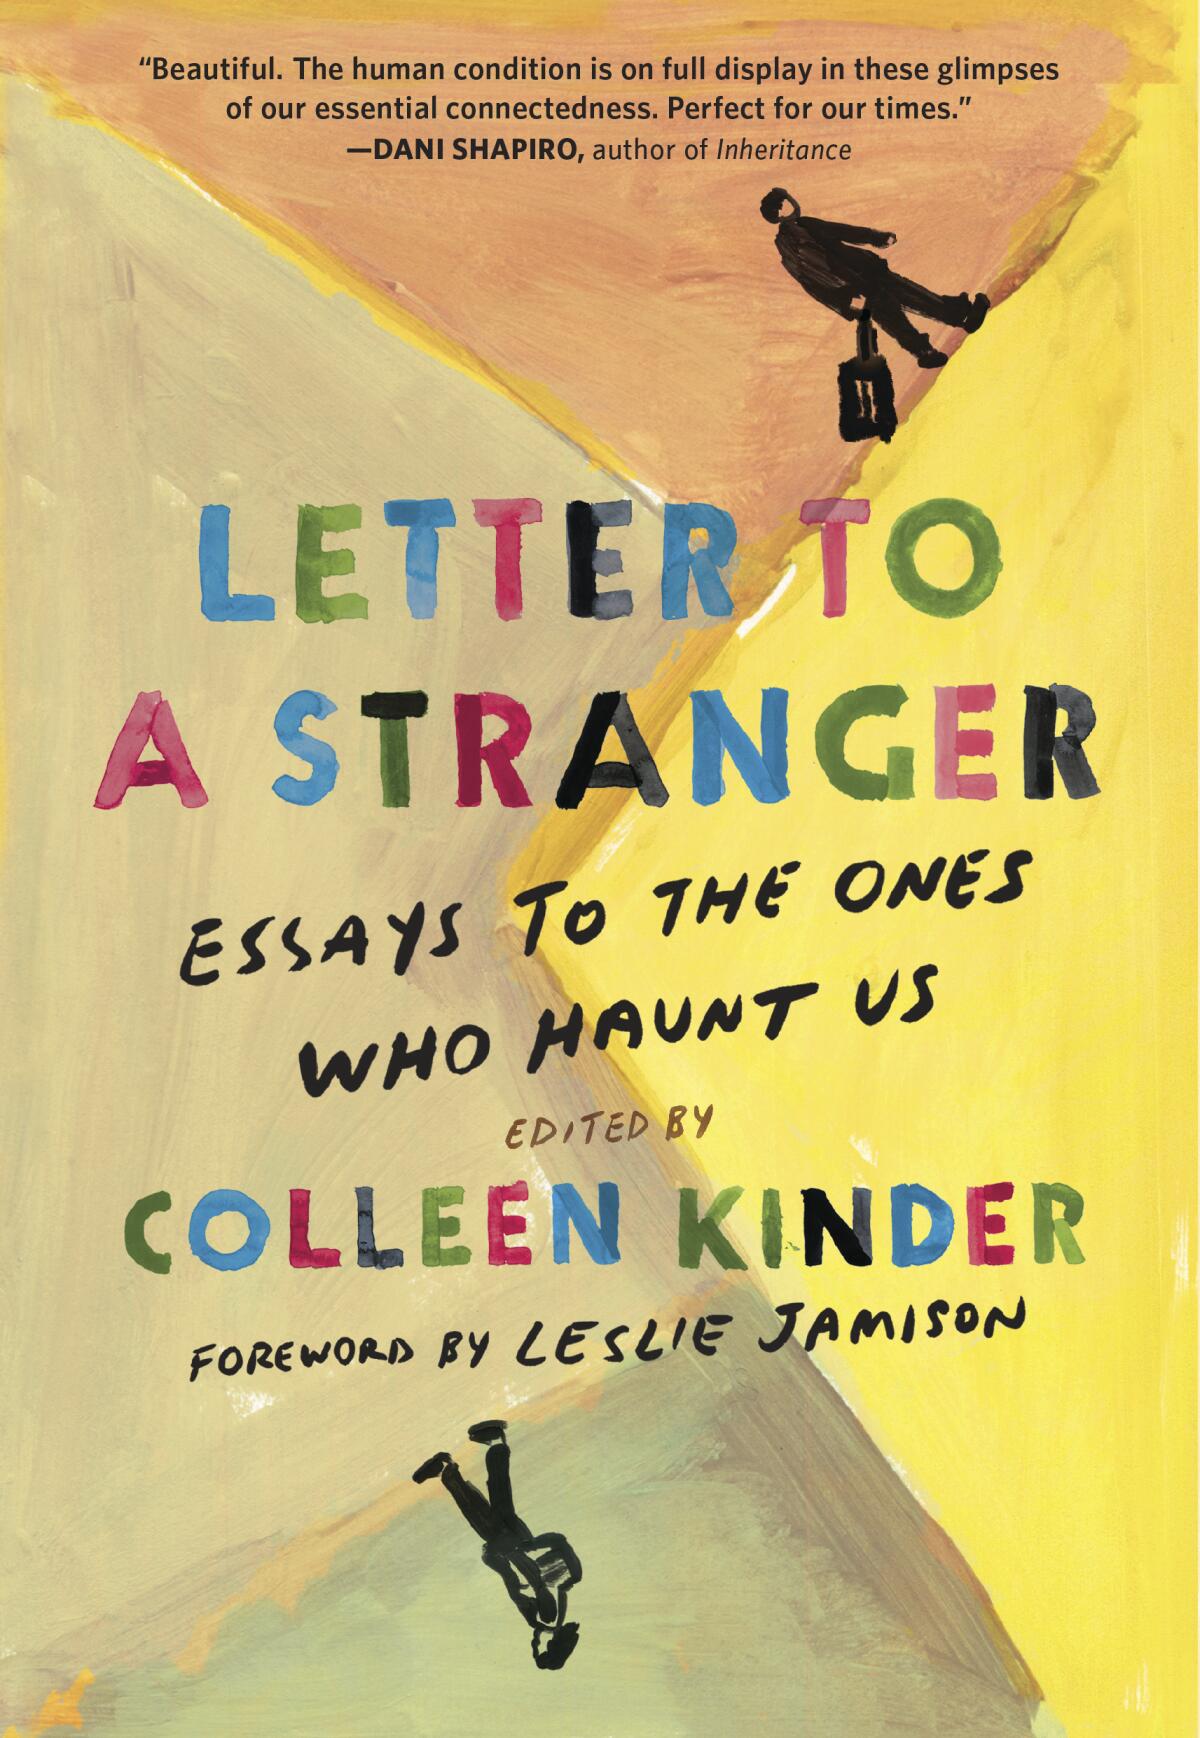 Book cover for "Letter to A Stranger: Essays to the Ones Who Haunt Us." 